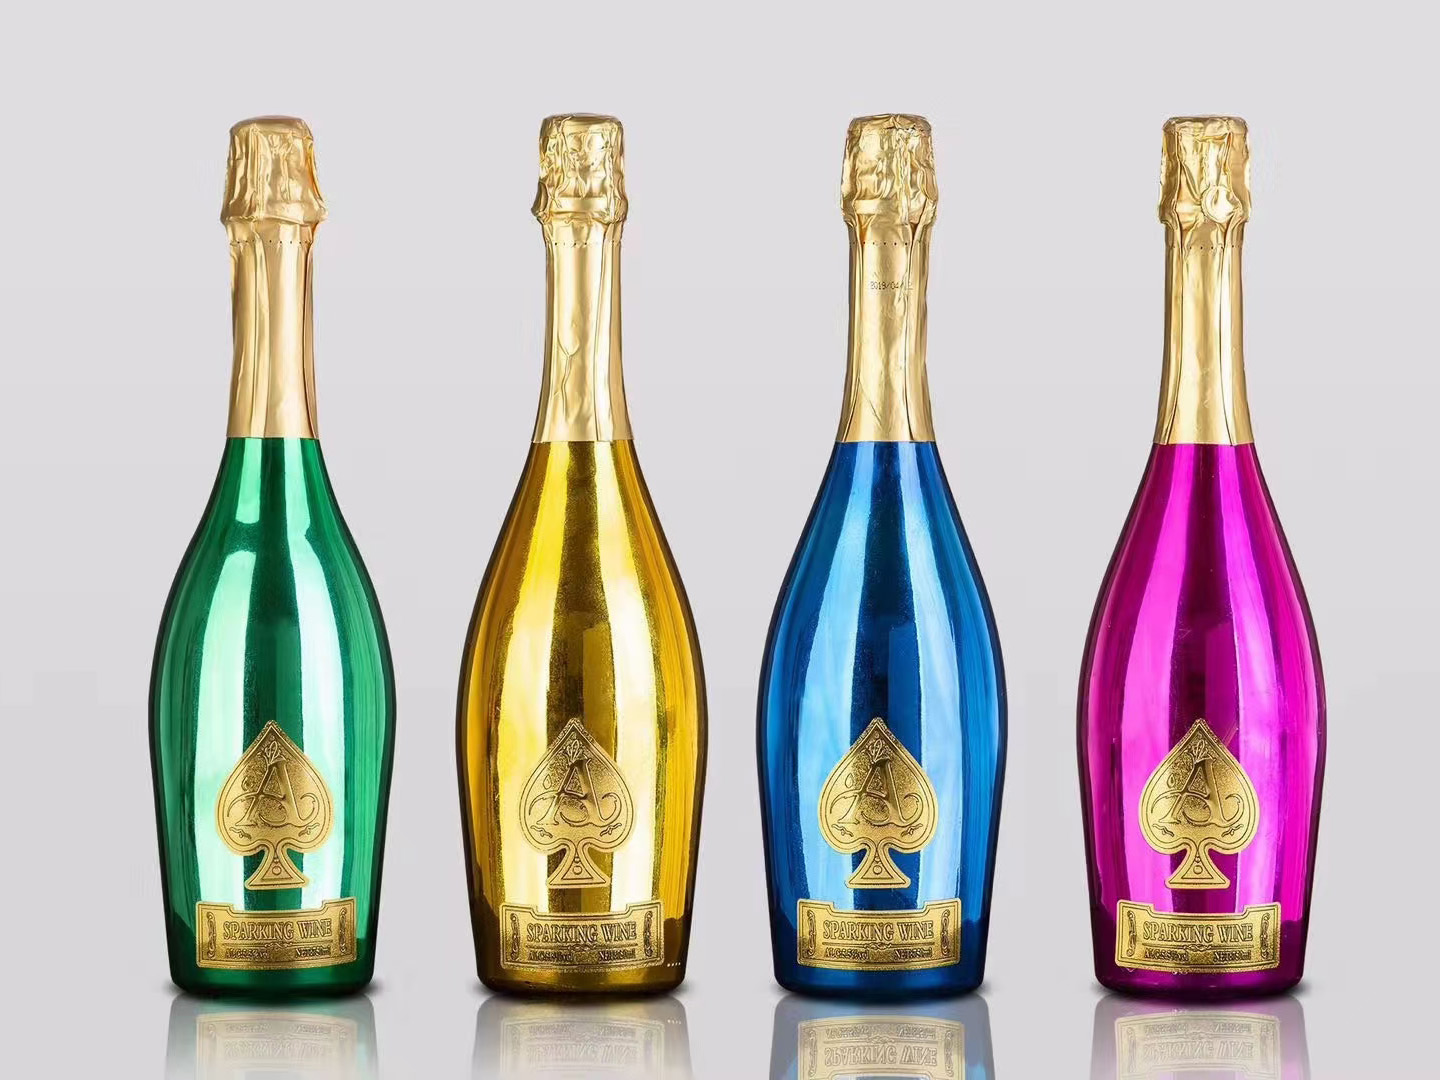 How does the glass bottle factory introduce the selection of glass wine bottles?